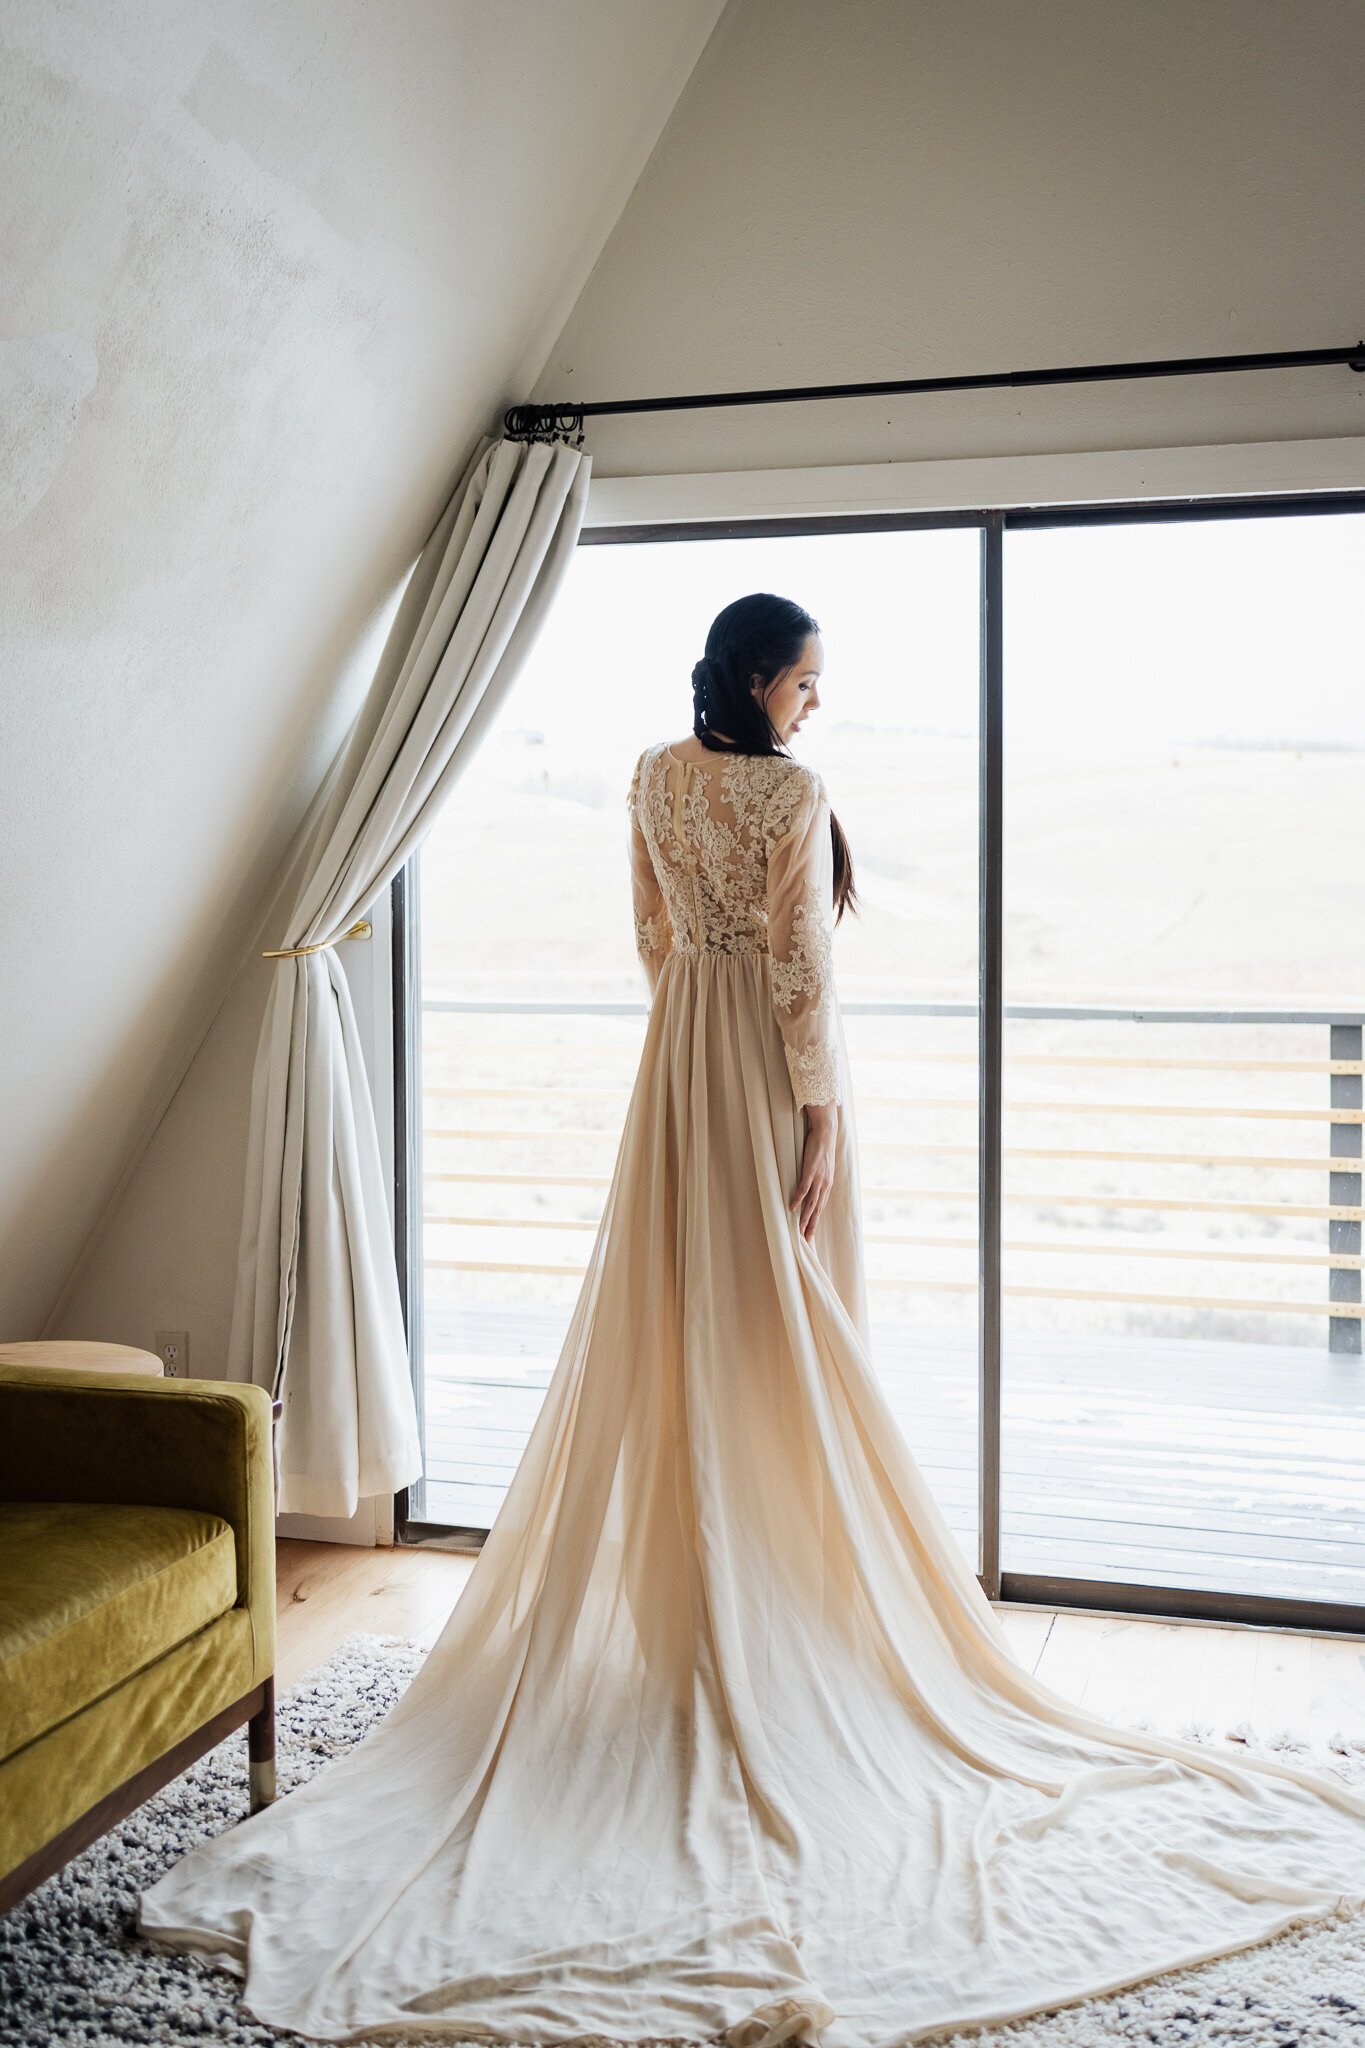 Bride looks out the window after changing into her wedding dress